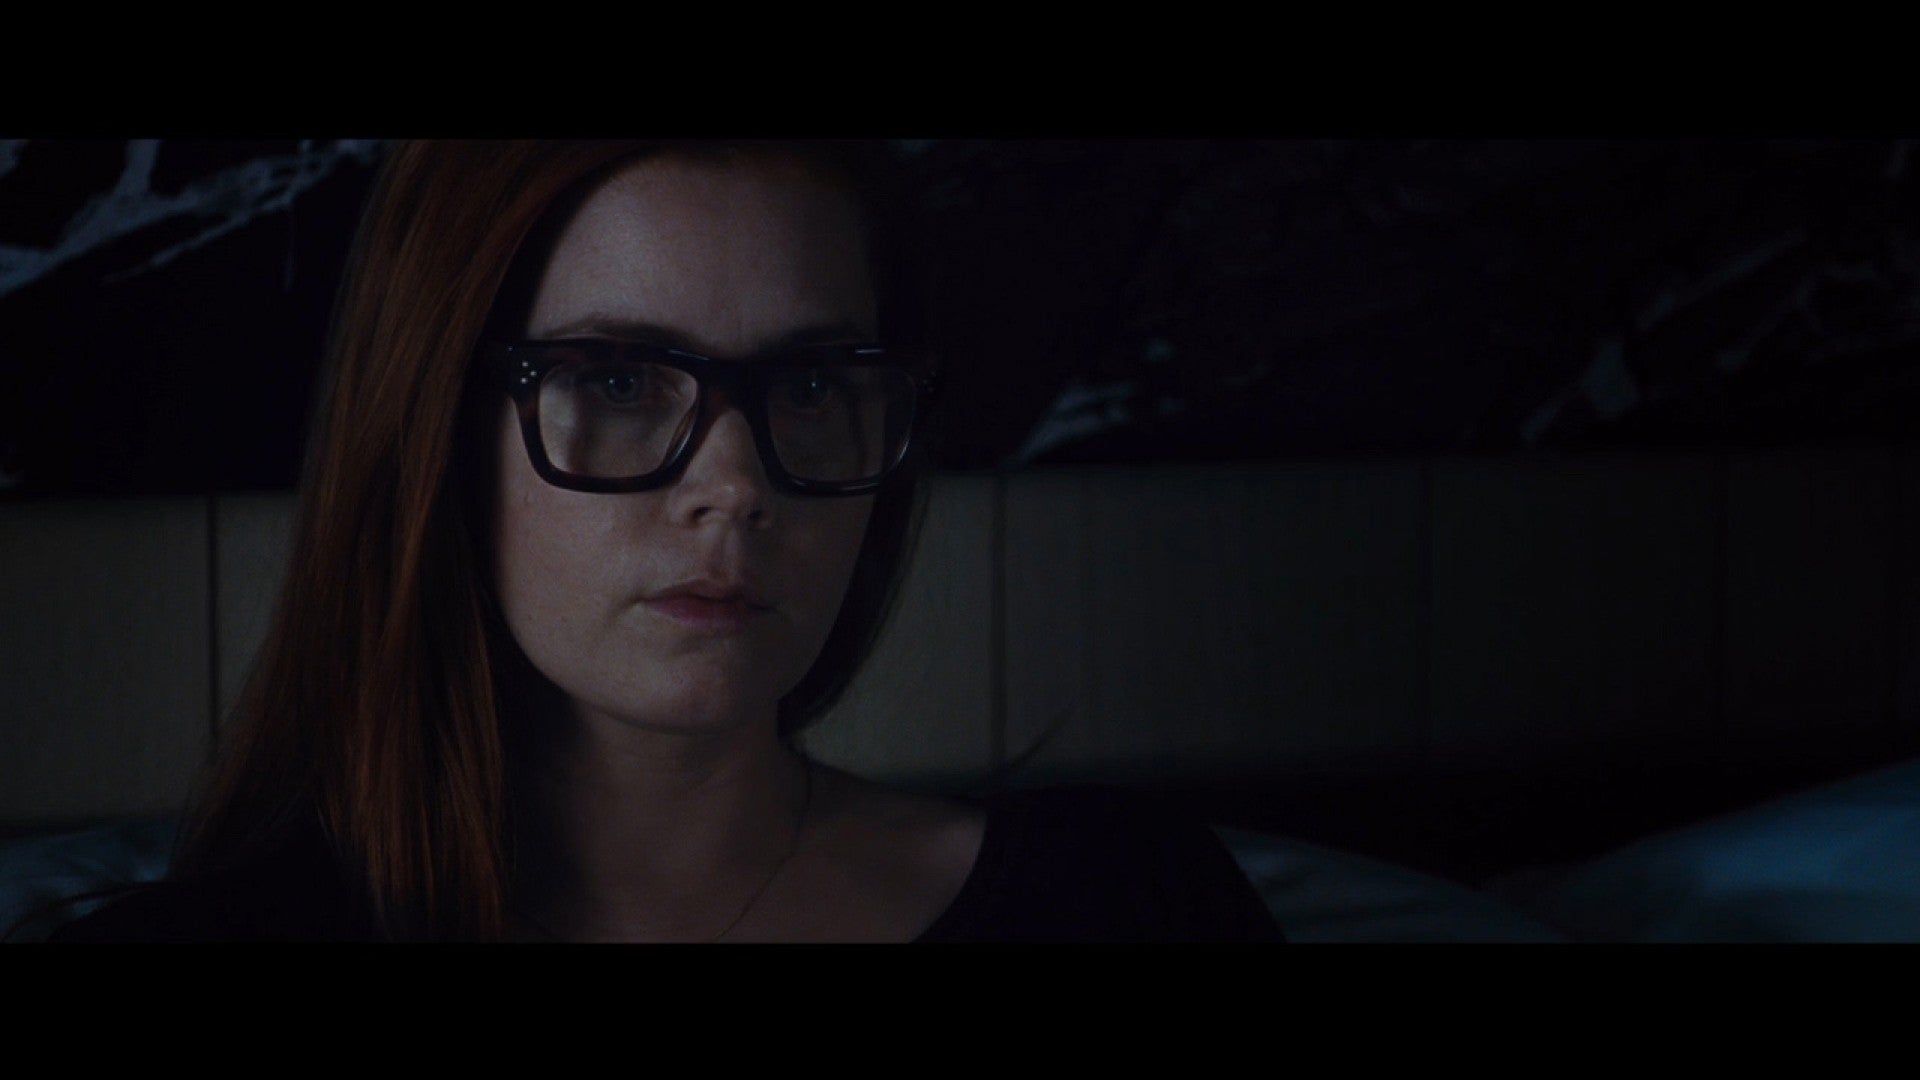 Amy Adams Stars in Chilling Tom Ford Thriller 'Nocturnal Animals'